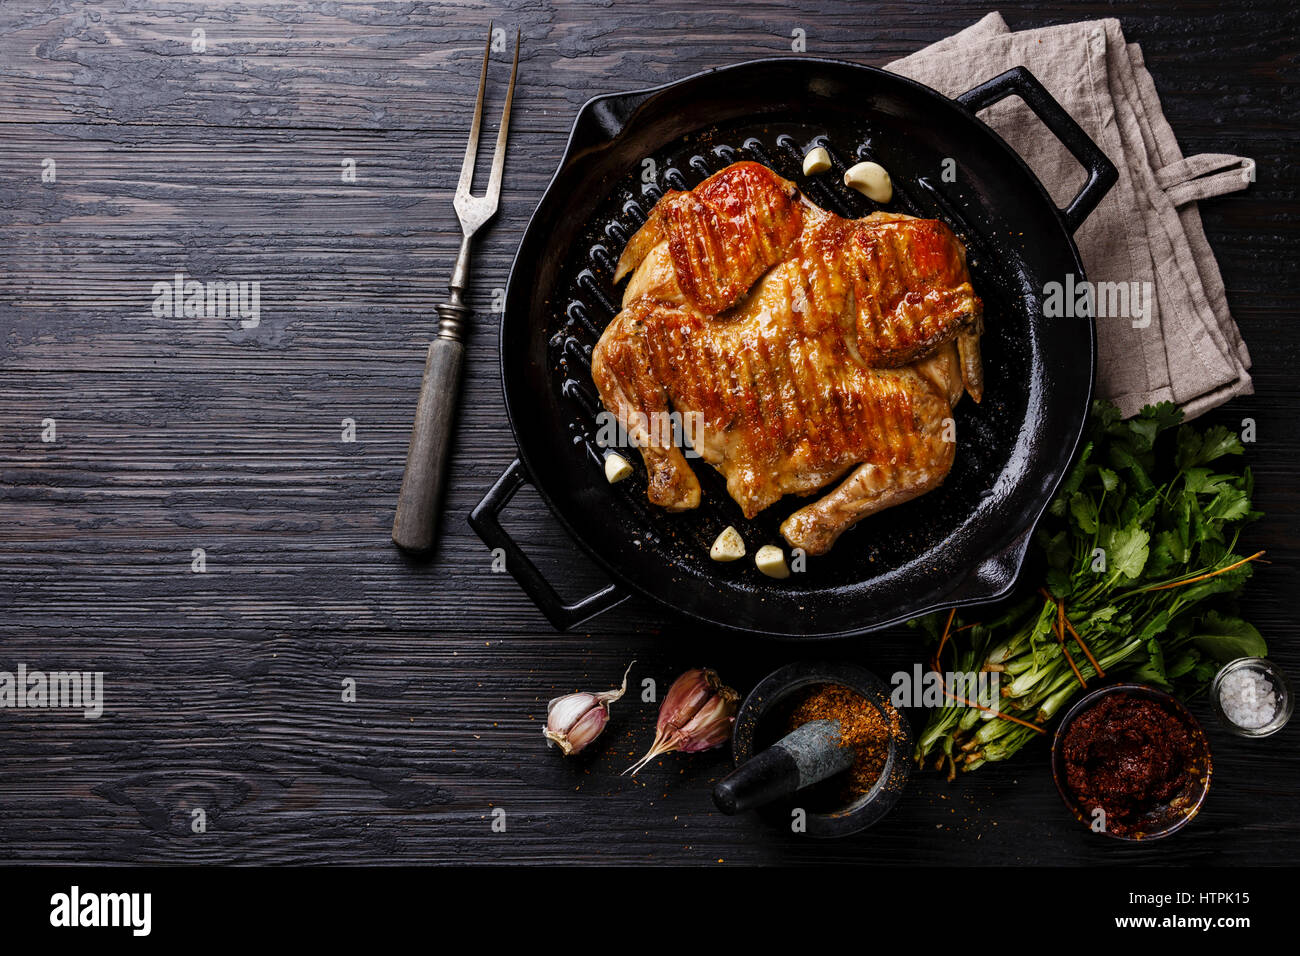 Grilled fried roast Chicken Tabaka in frying pan on wooden background copy space Stock Photo